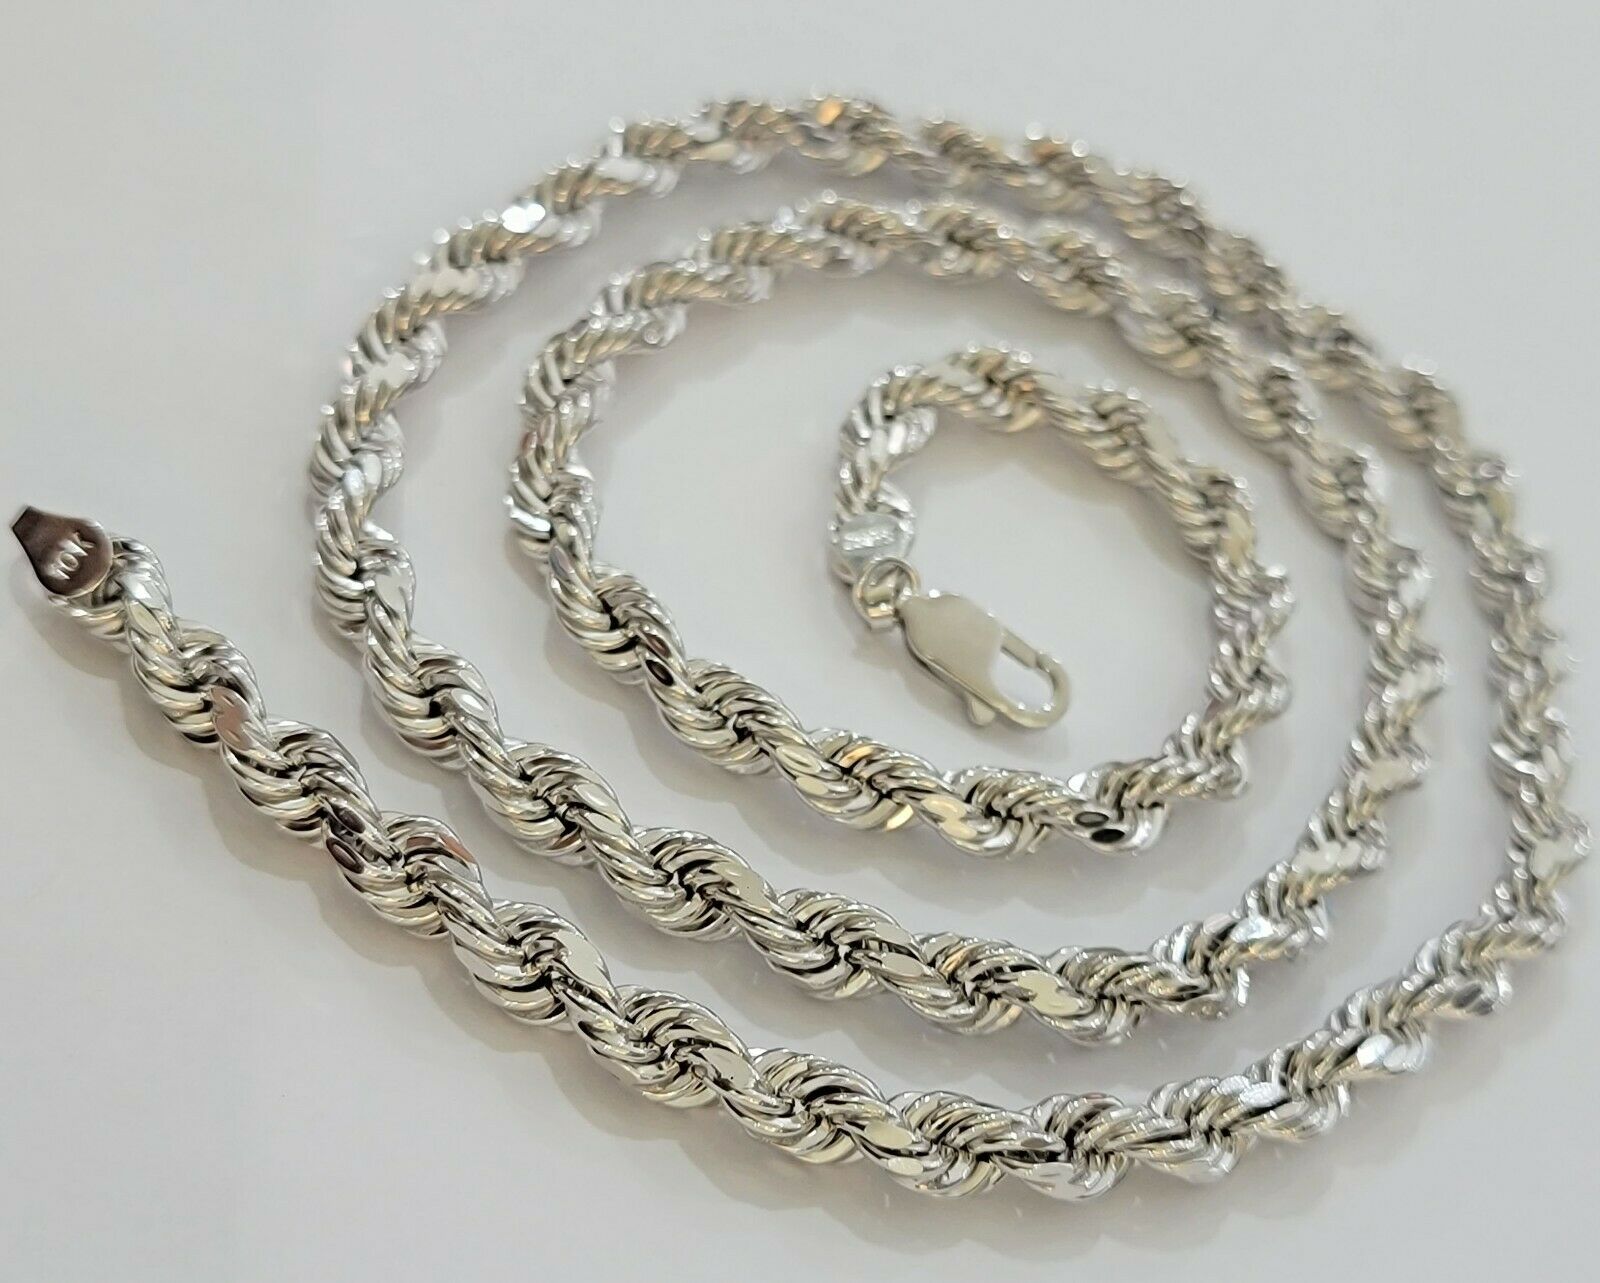 Real Gold 10K Rope Necklace Men's Chain 6mm 20 22 24 White Gold Diamond Cuts 22 inch